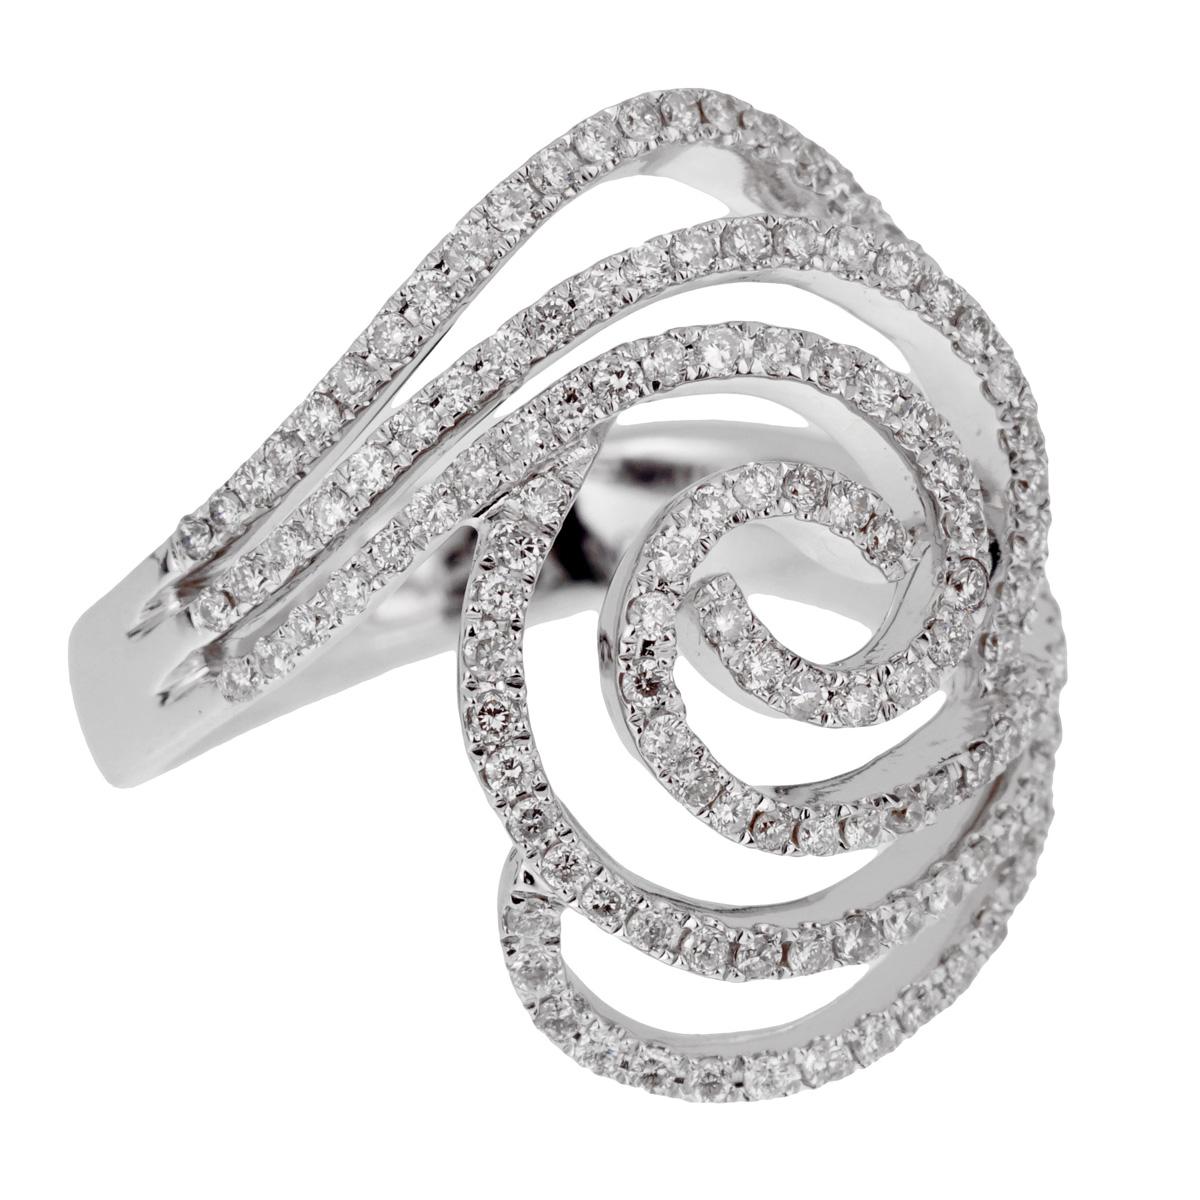 A fabulous ladies diamond cocktail ring featuring a circular pattern adorned with round brilliant cut diamonds in 18k white gold.